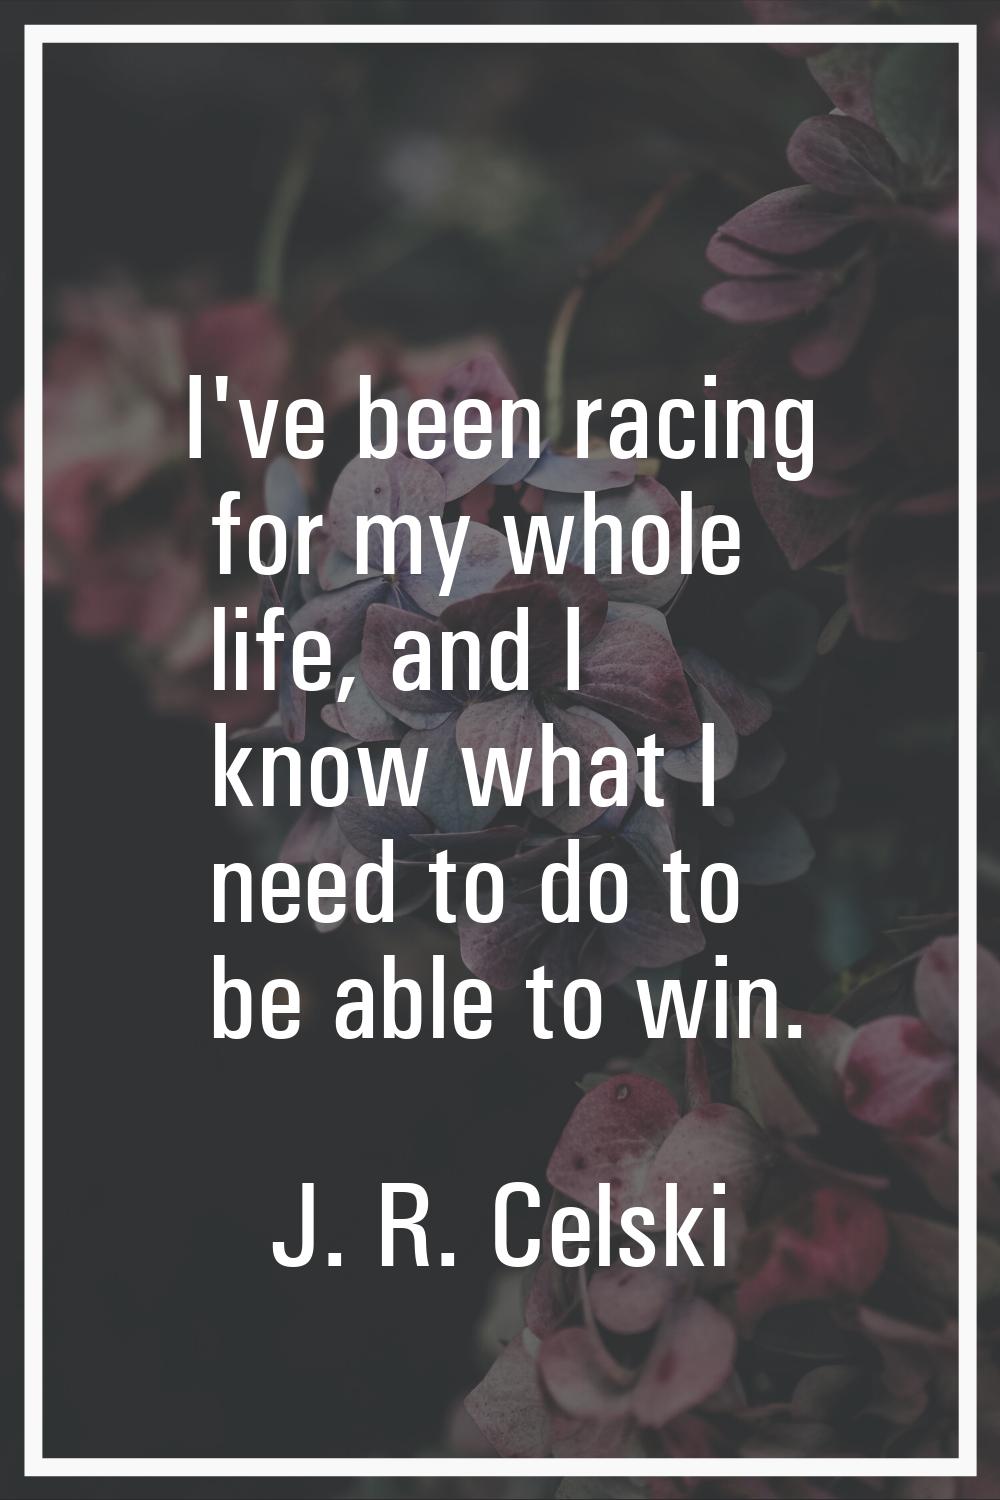 I've been racing for my whole life, and I know what I need to do to be able to win.